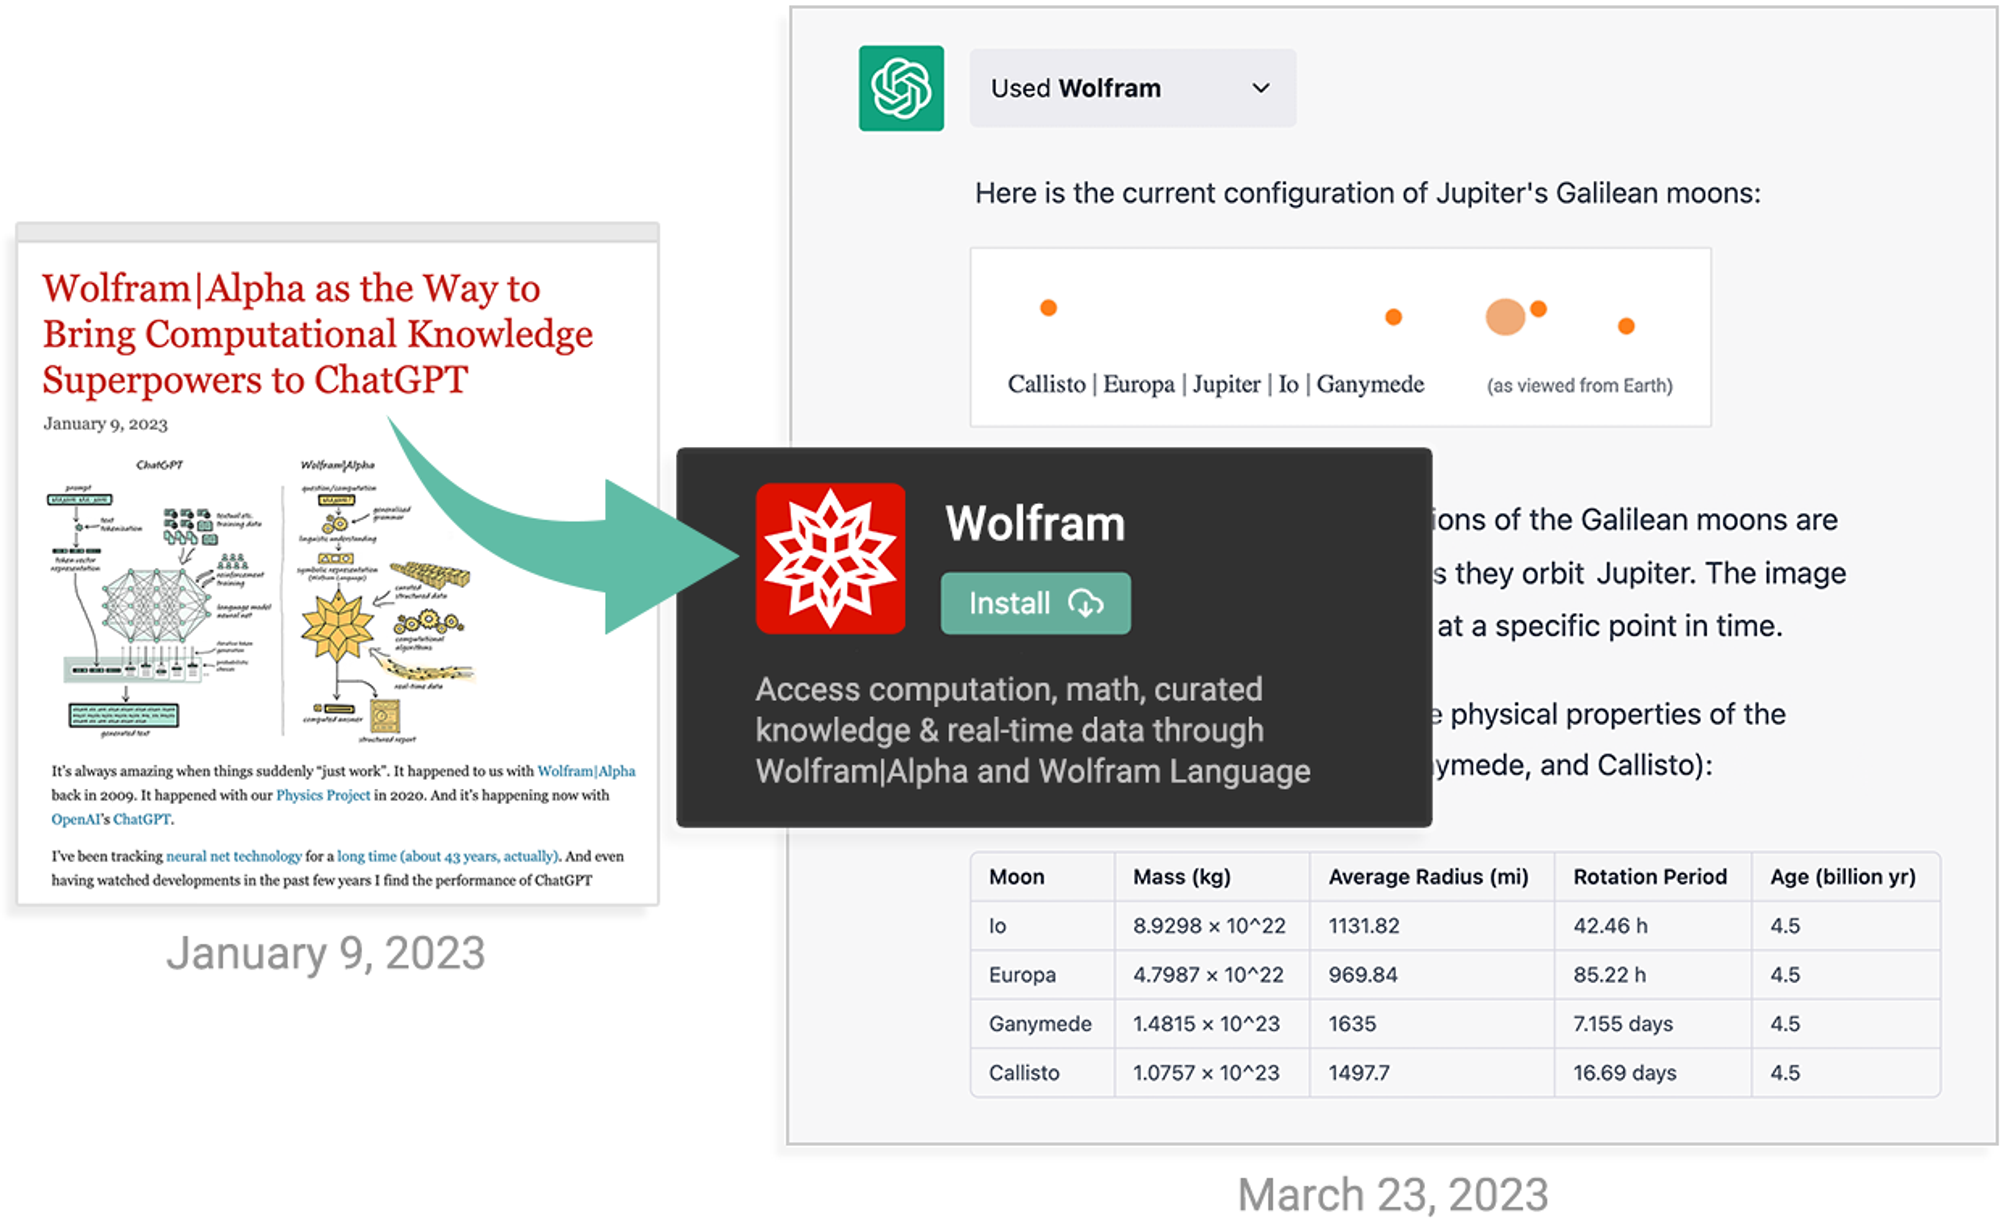 ChatGPT Gets Its “Wolfram Superpowers”!